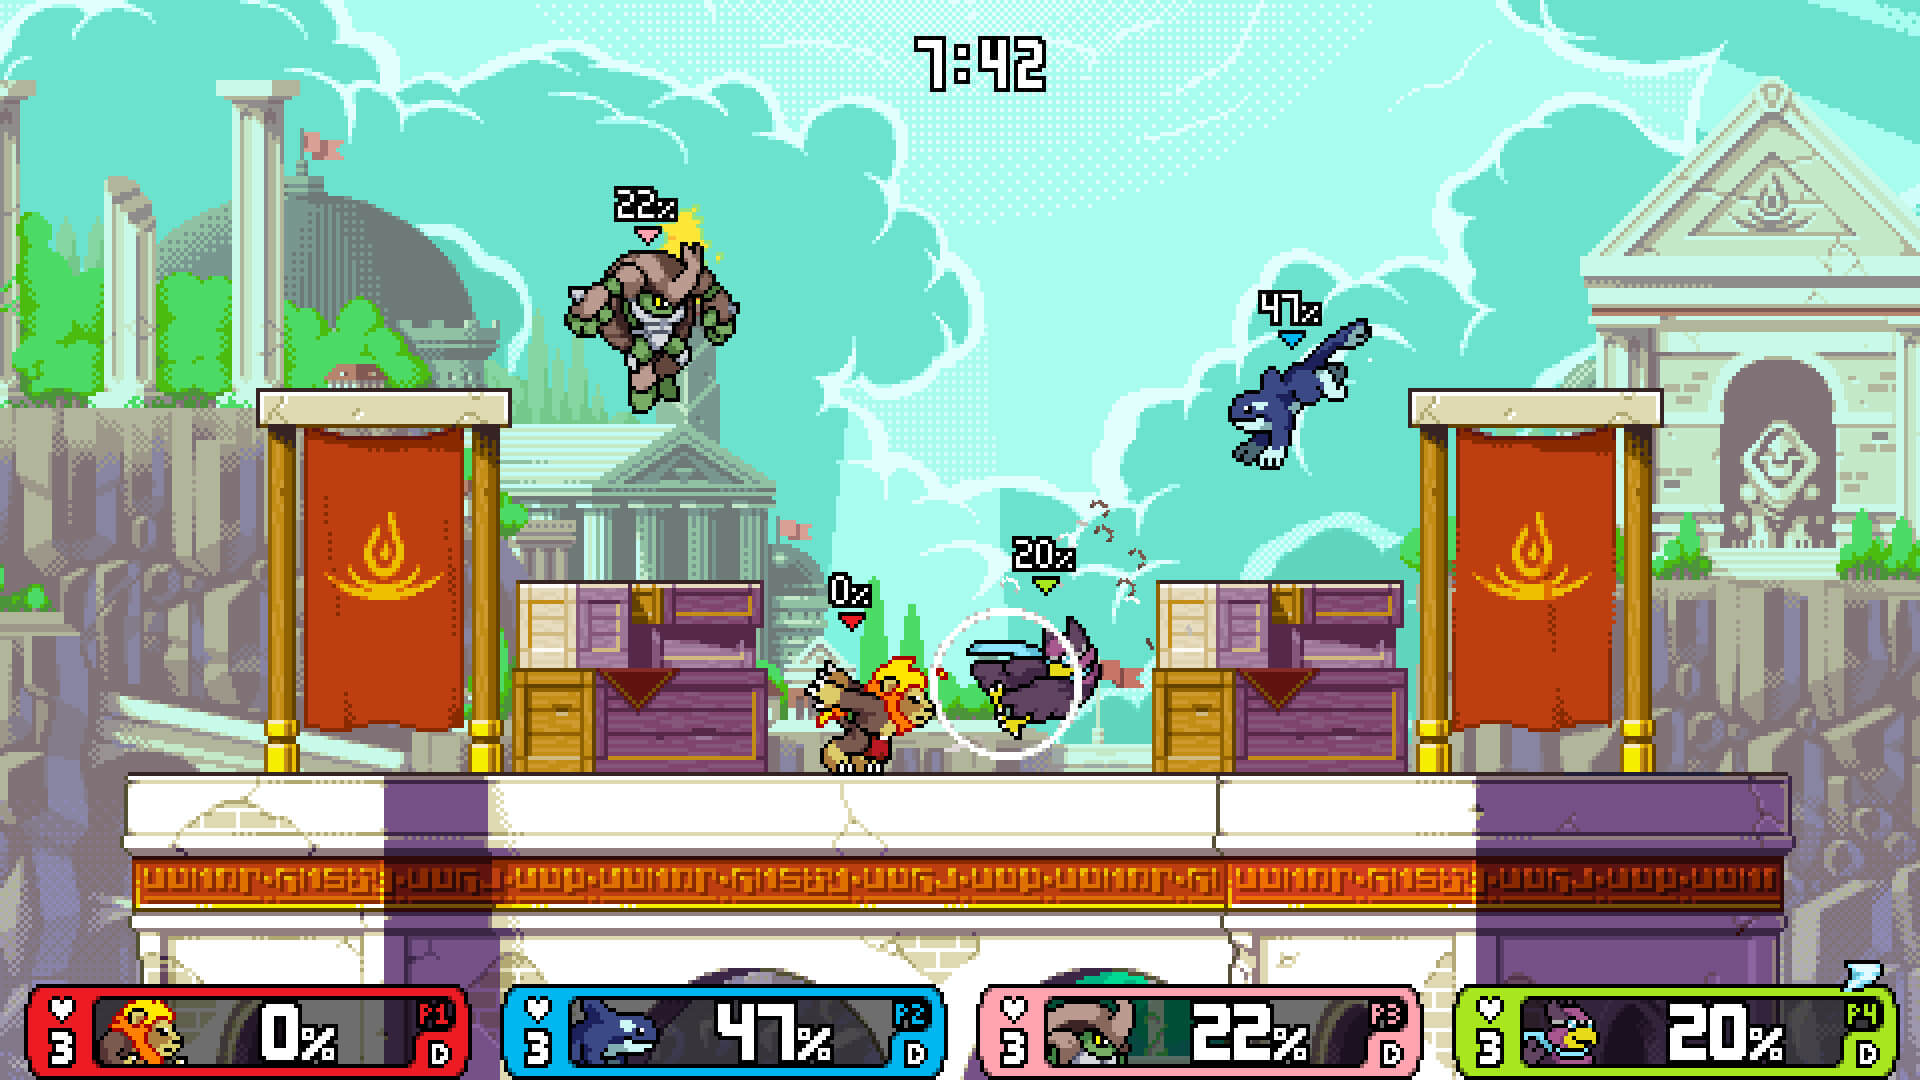 rivals of aether free download workshop